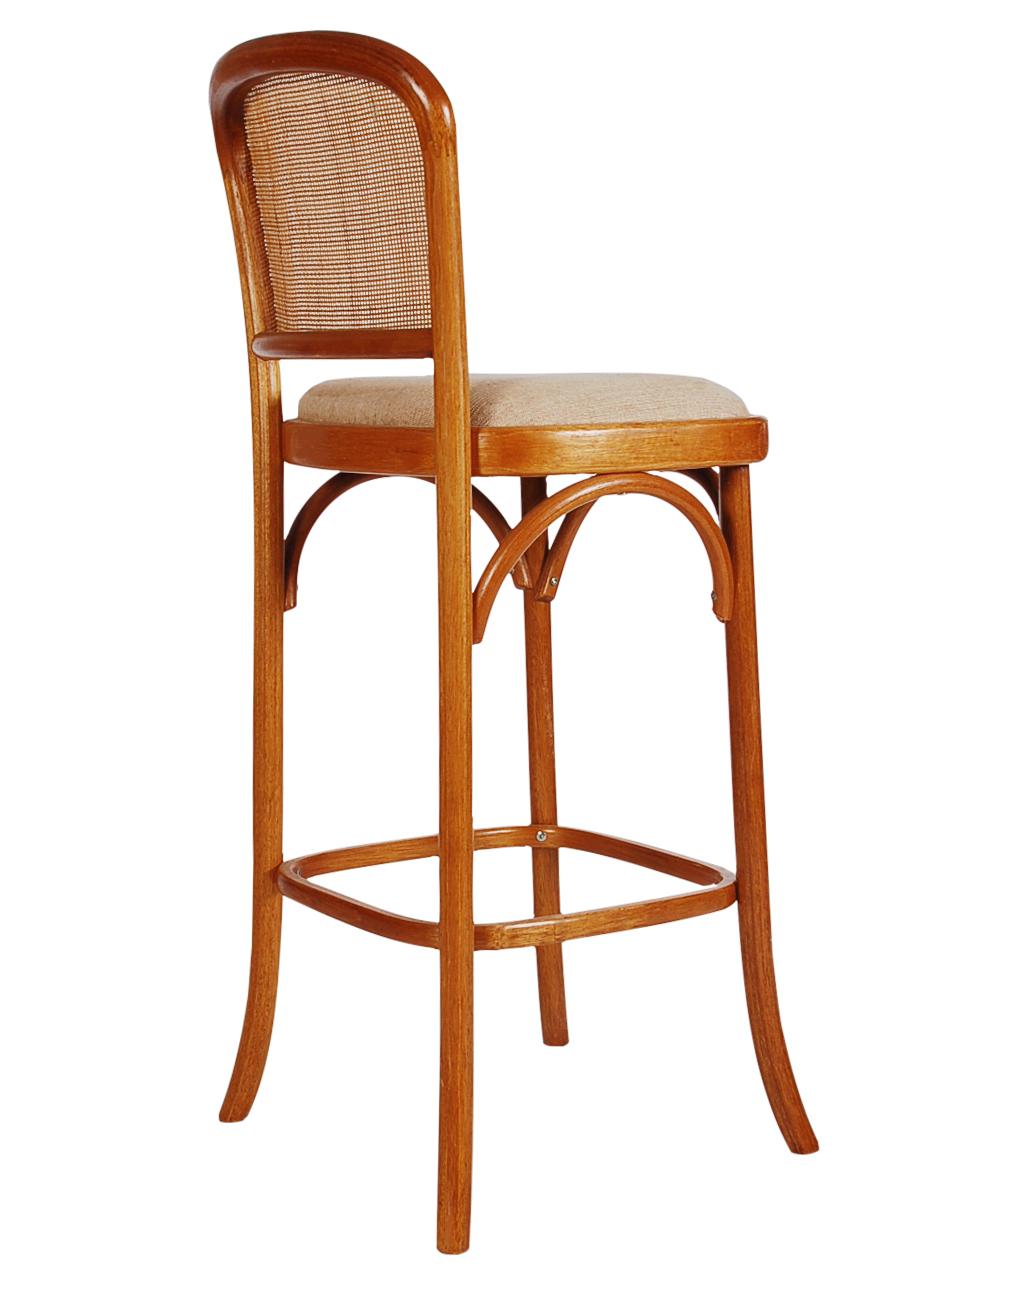 A beautiful matching set of four barstools attributed to Thonet, circa 1970s. These stools feature solid birch frames with caned backs and upholstered cushion seats. Price includes set of four stools.